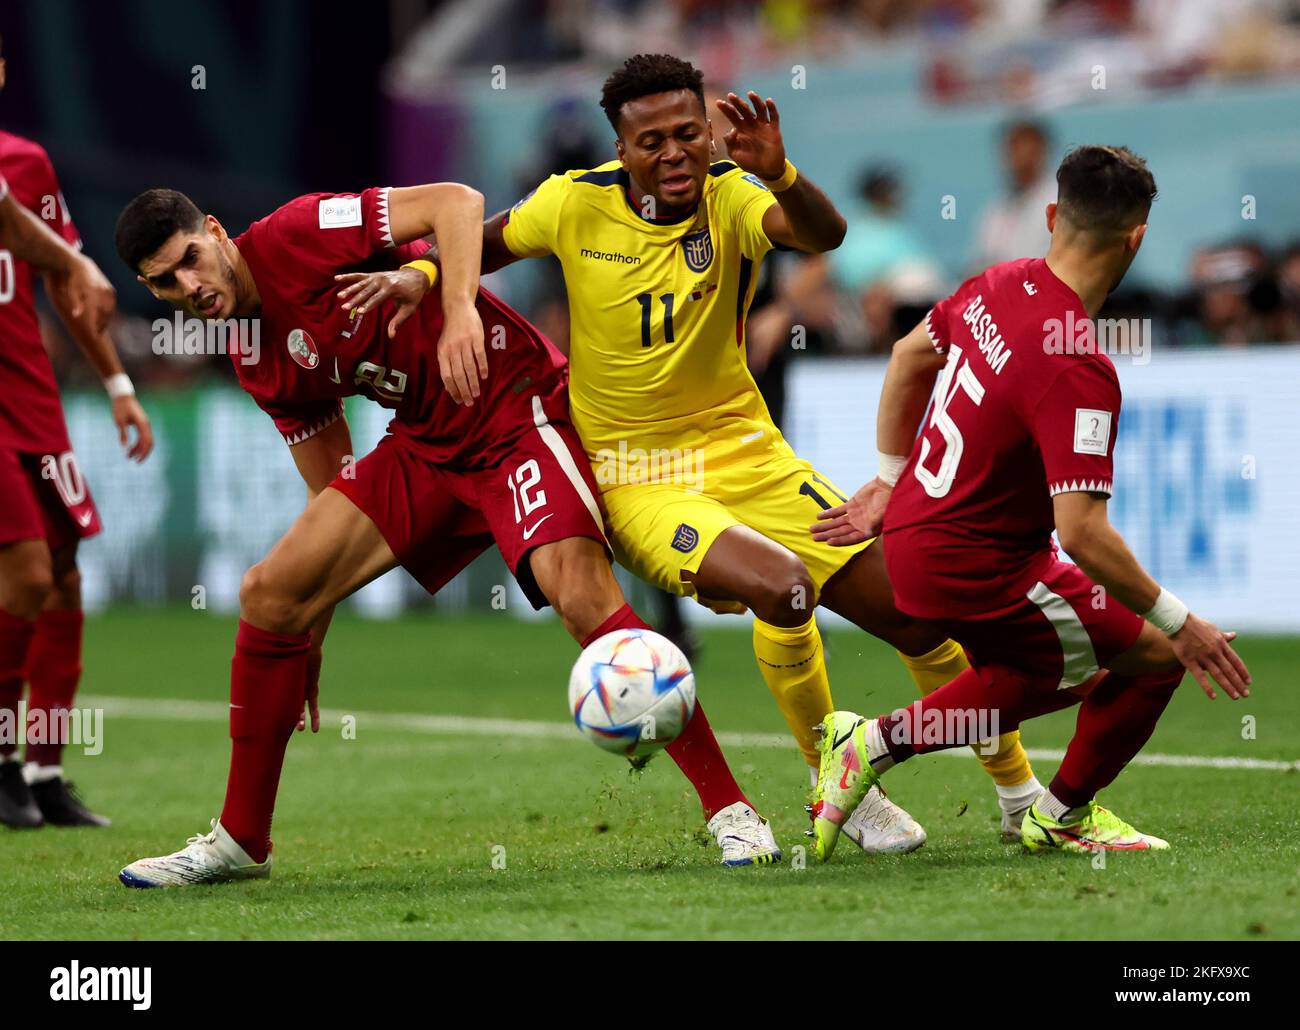 Al Khor, Qatar. 20th Nov, 2022. Karim Boudiaf of Qatar and Bassam Alrawi of Qatar combine to try and stop Michael Estrada of Equador during the FIFA World Cup 2022 match at Al Bayt Stadium, Al Khor. Picture credit should read: David Klein/Sportimage Credit: Sportimage/Alamy Live News Stock Photo